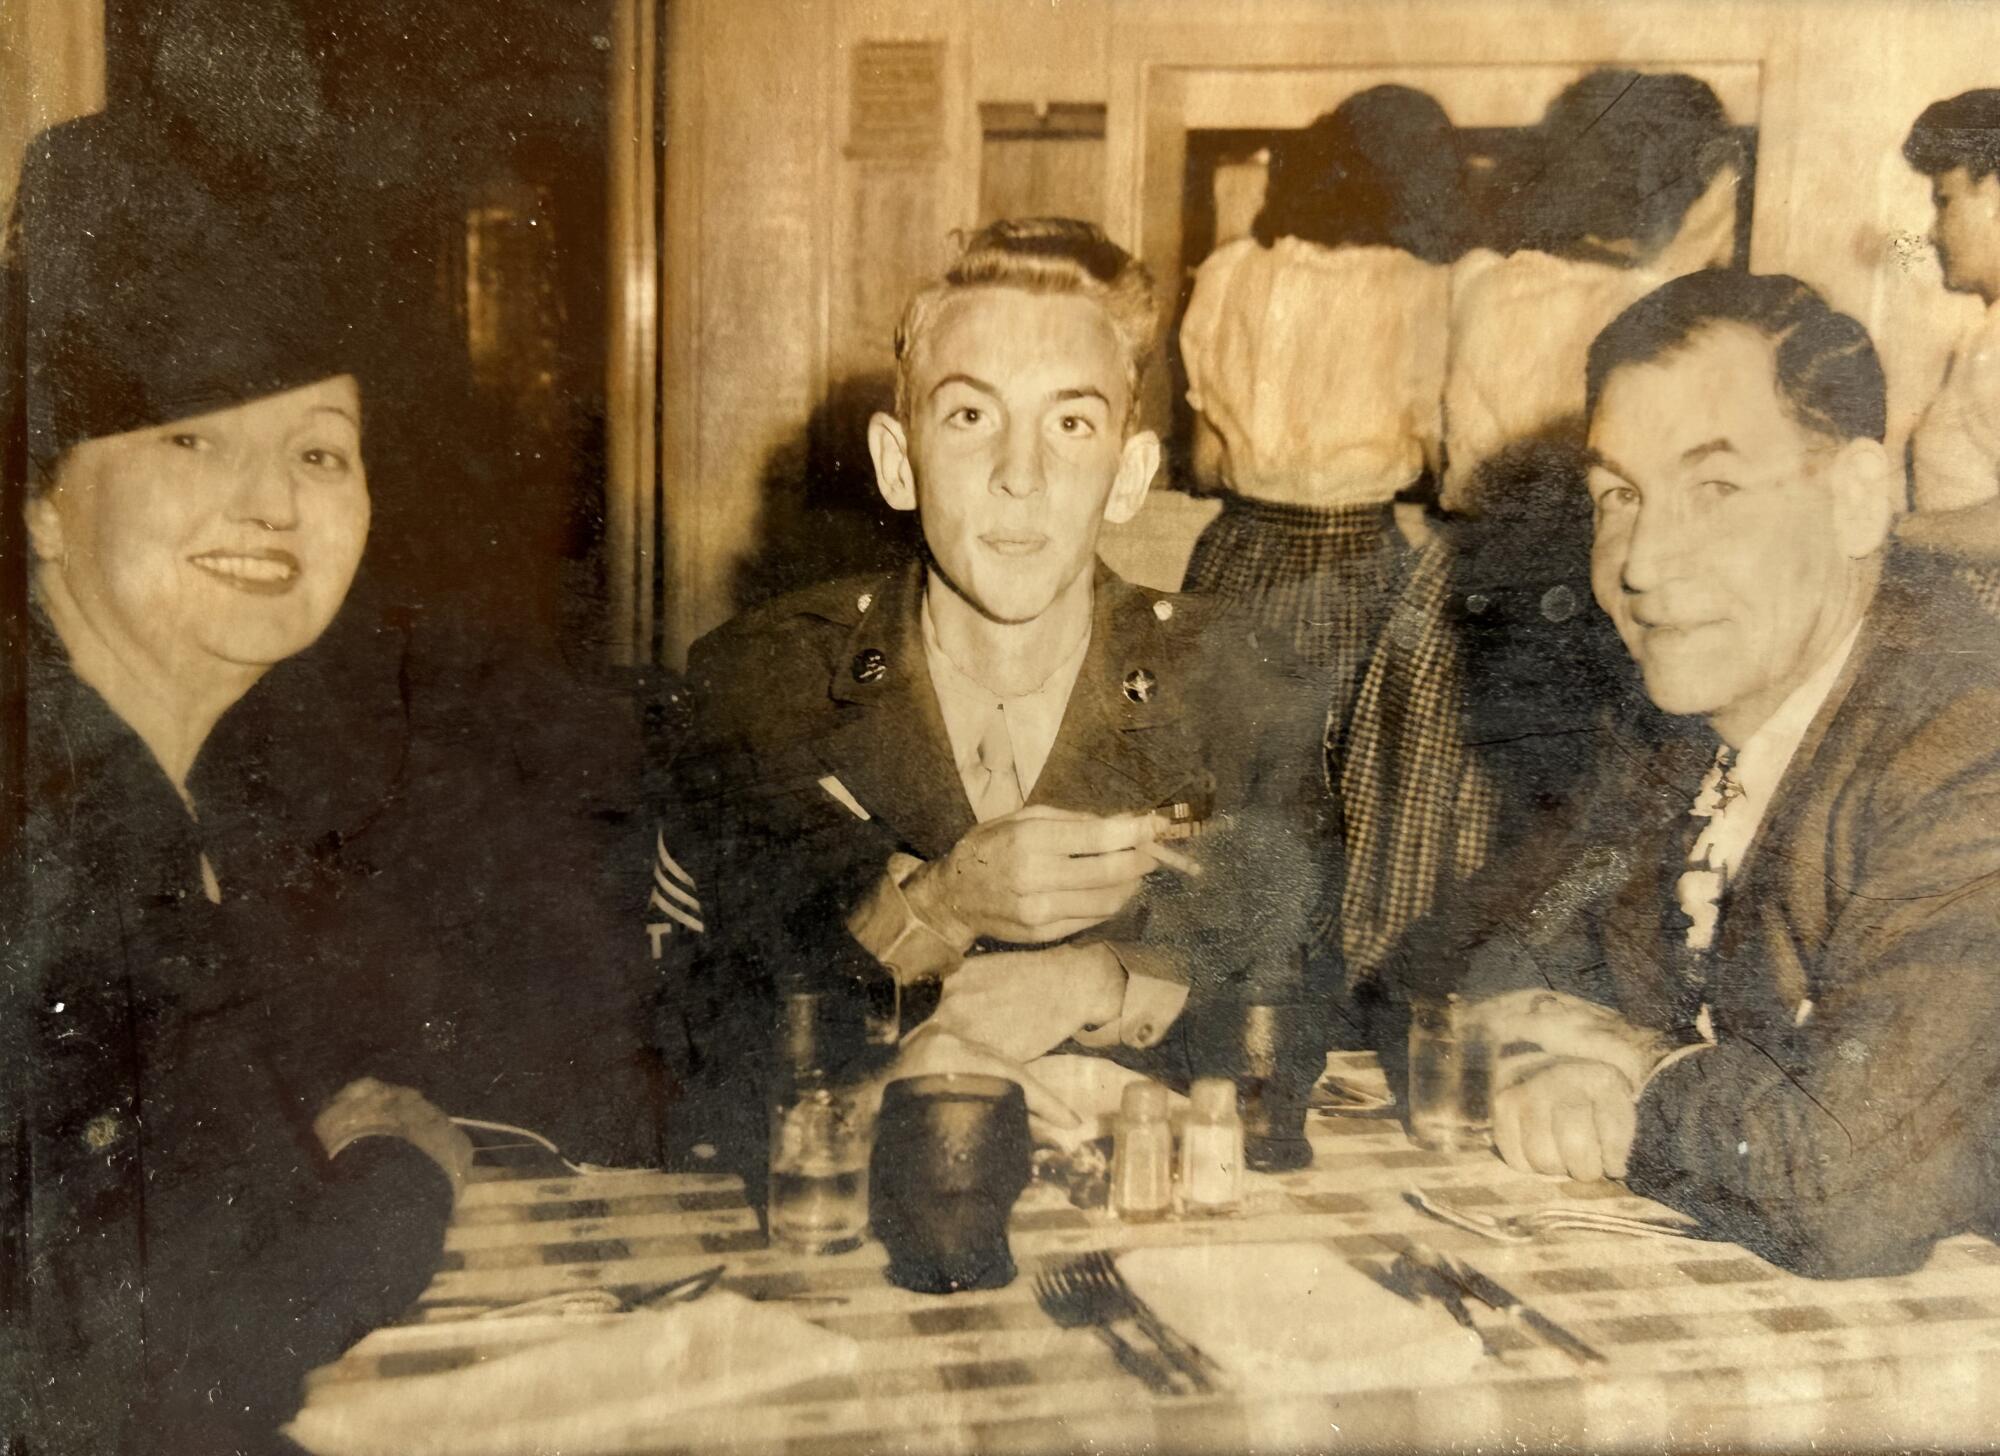 A young man seated between his parents in a vintage photo.